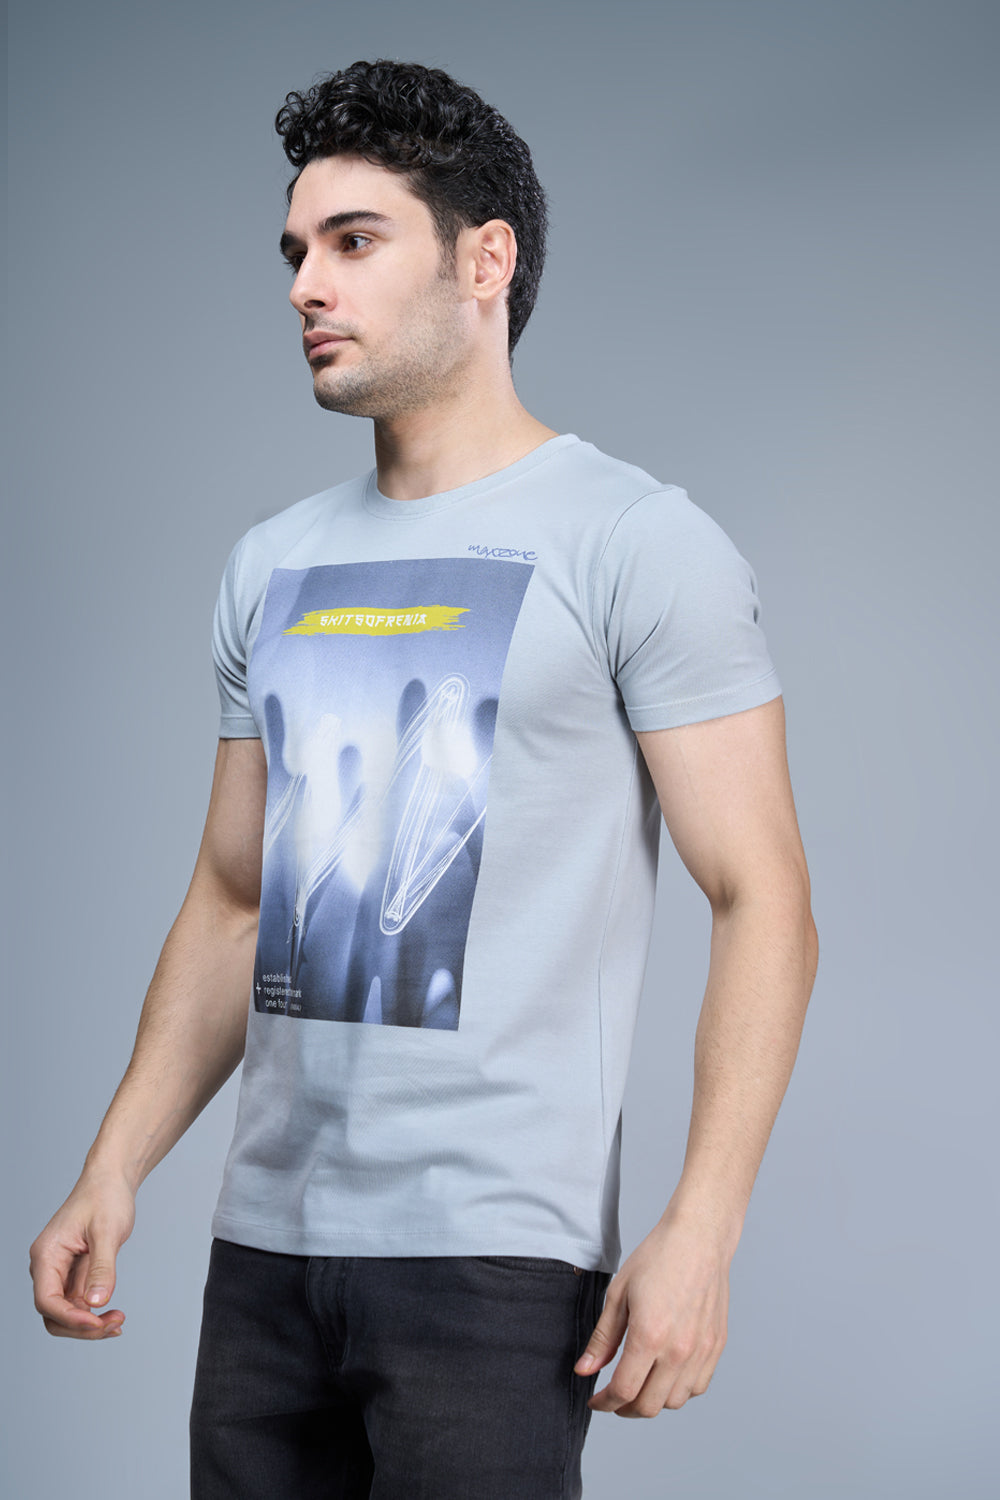 Night blue colored, cotton Graphic T shirt for men, half sleeves and round neck, side view.